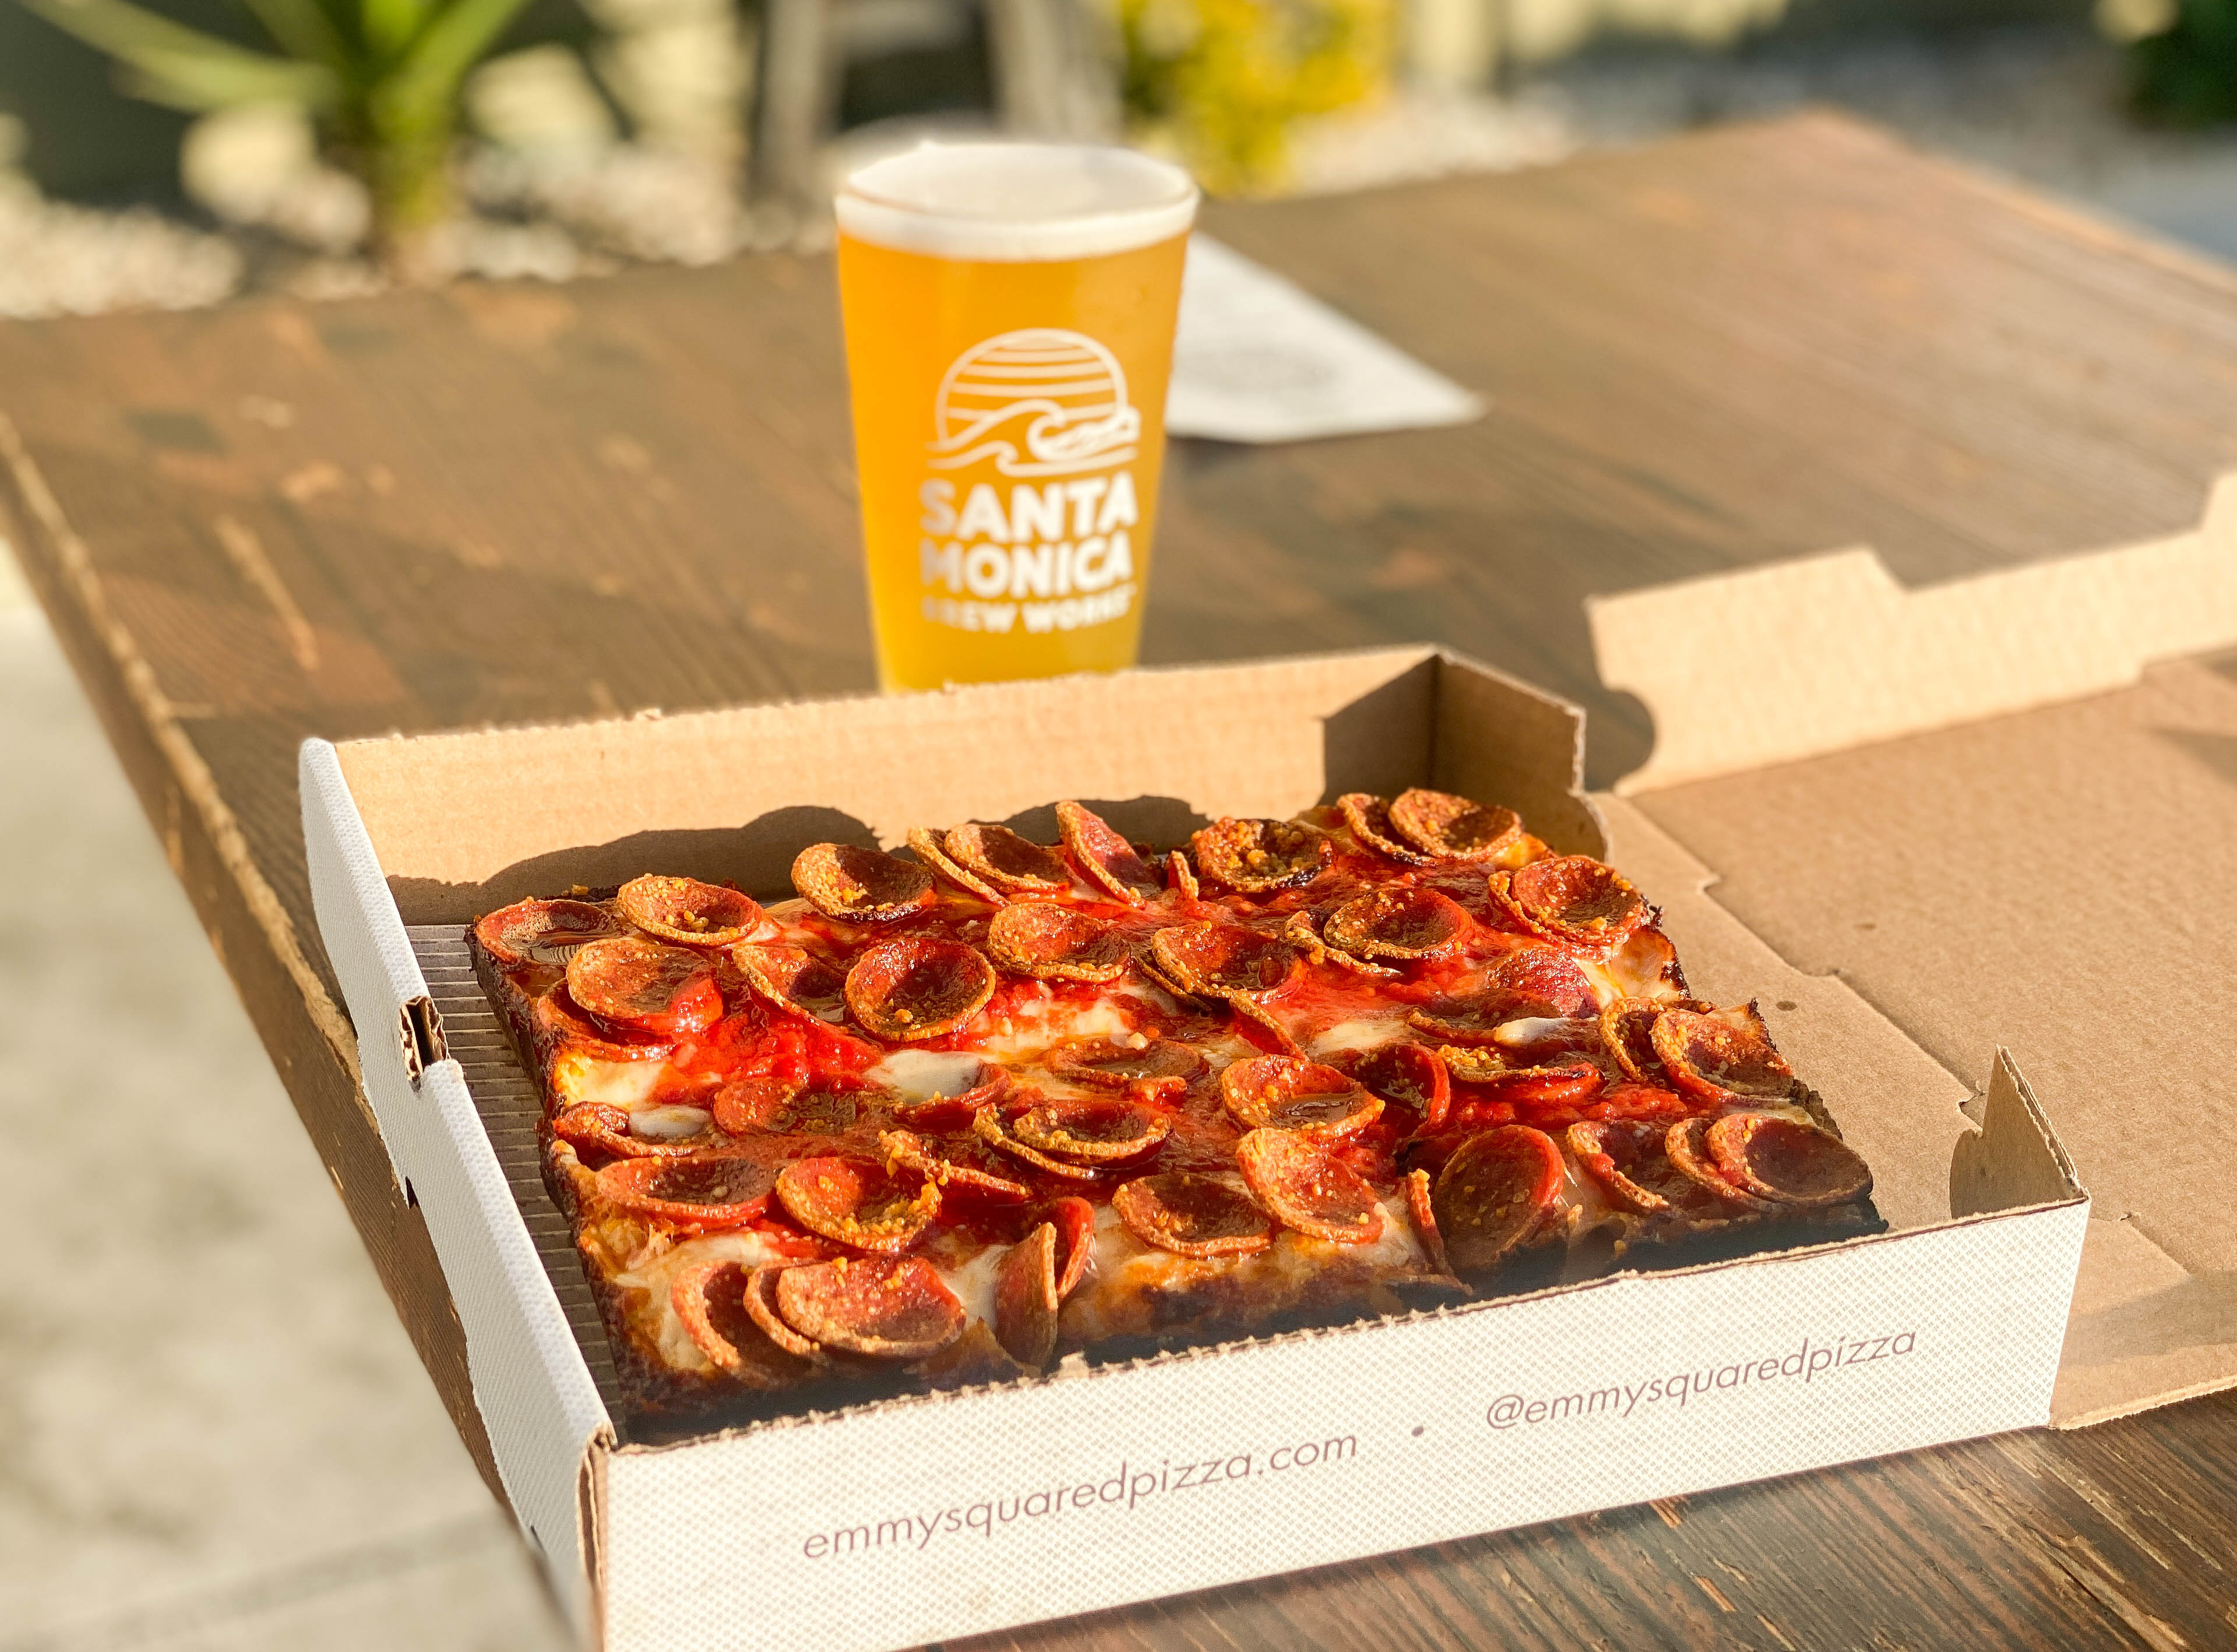 A square pizza in a to go box with a pint of light yellow beer beyond.